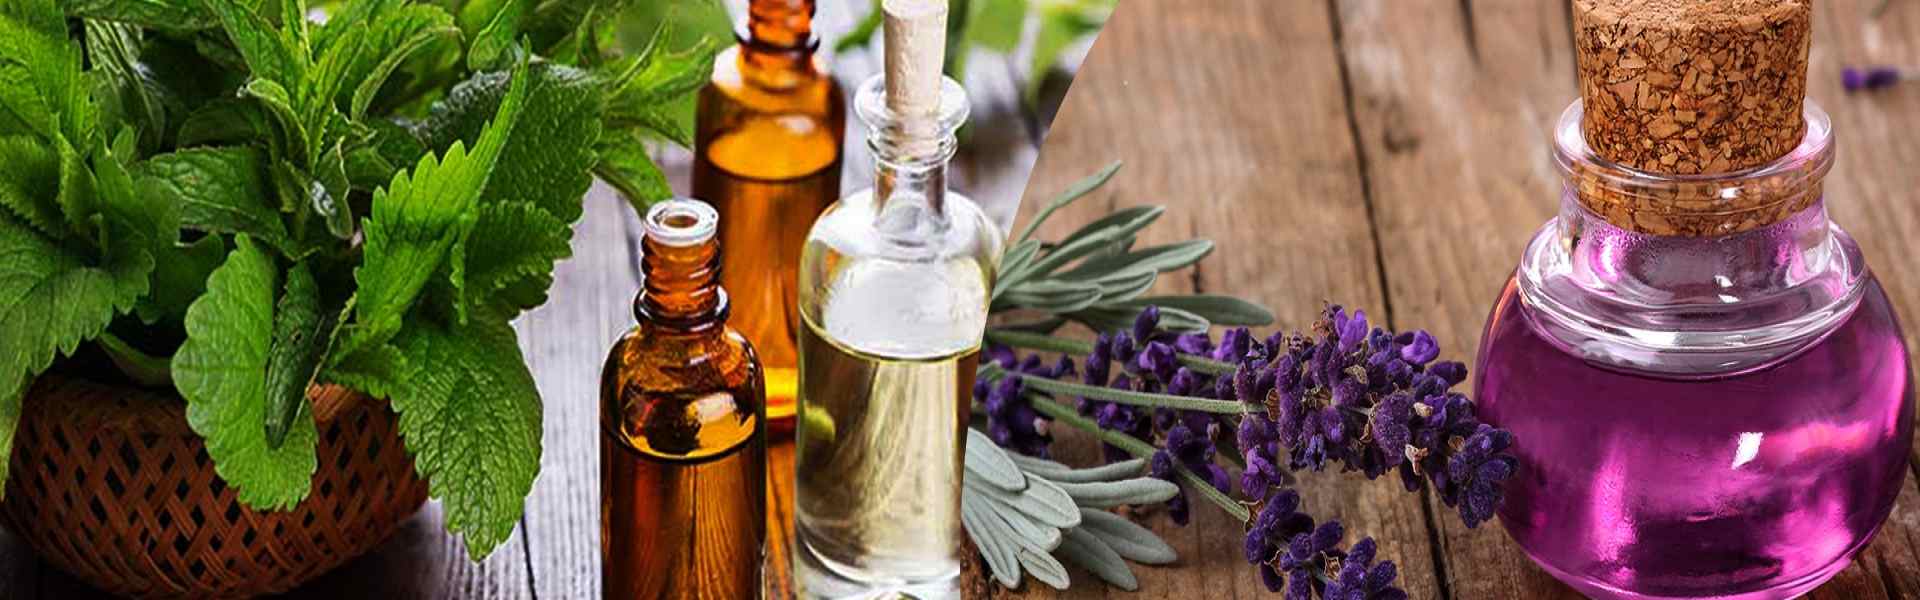 100% Natural: Find highest quality of Essential Oils